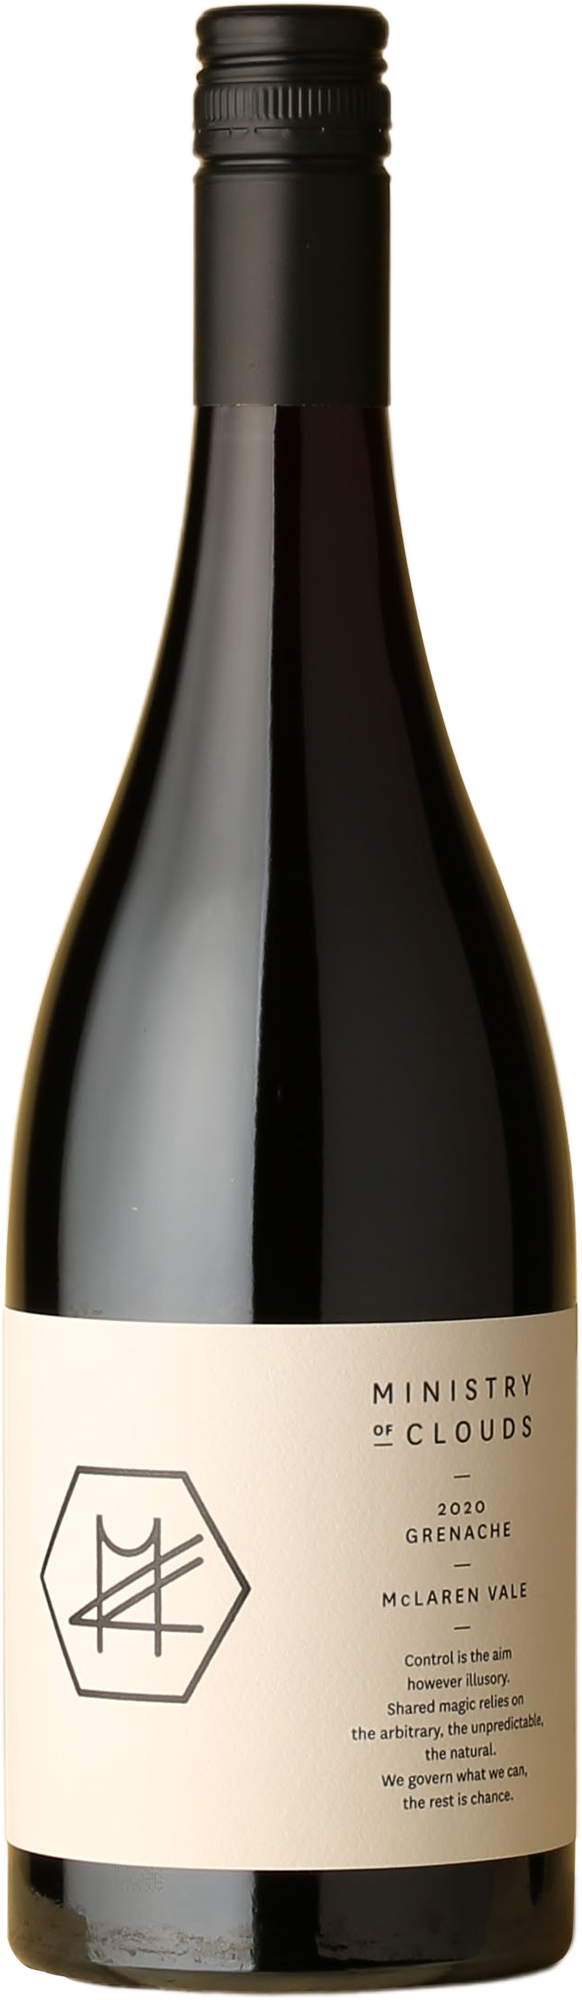 Ministry of Clouds - Grenache 2020 Red Wine